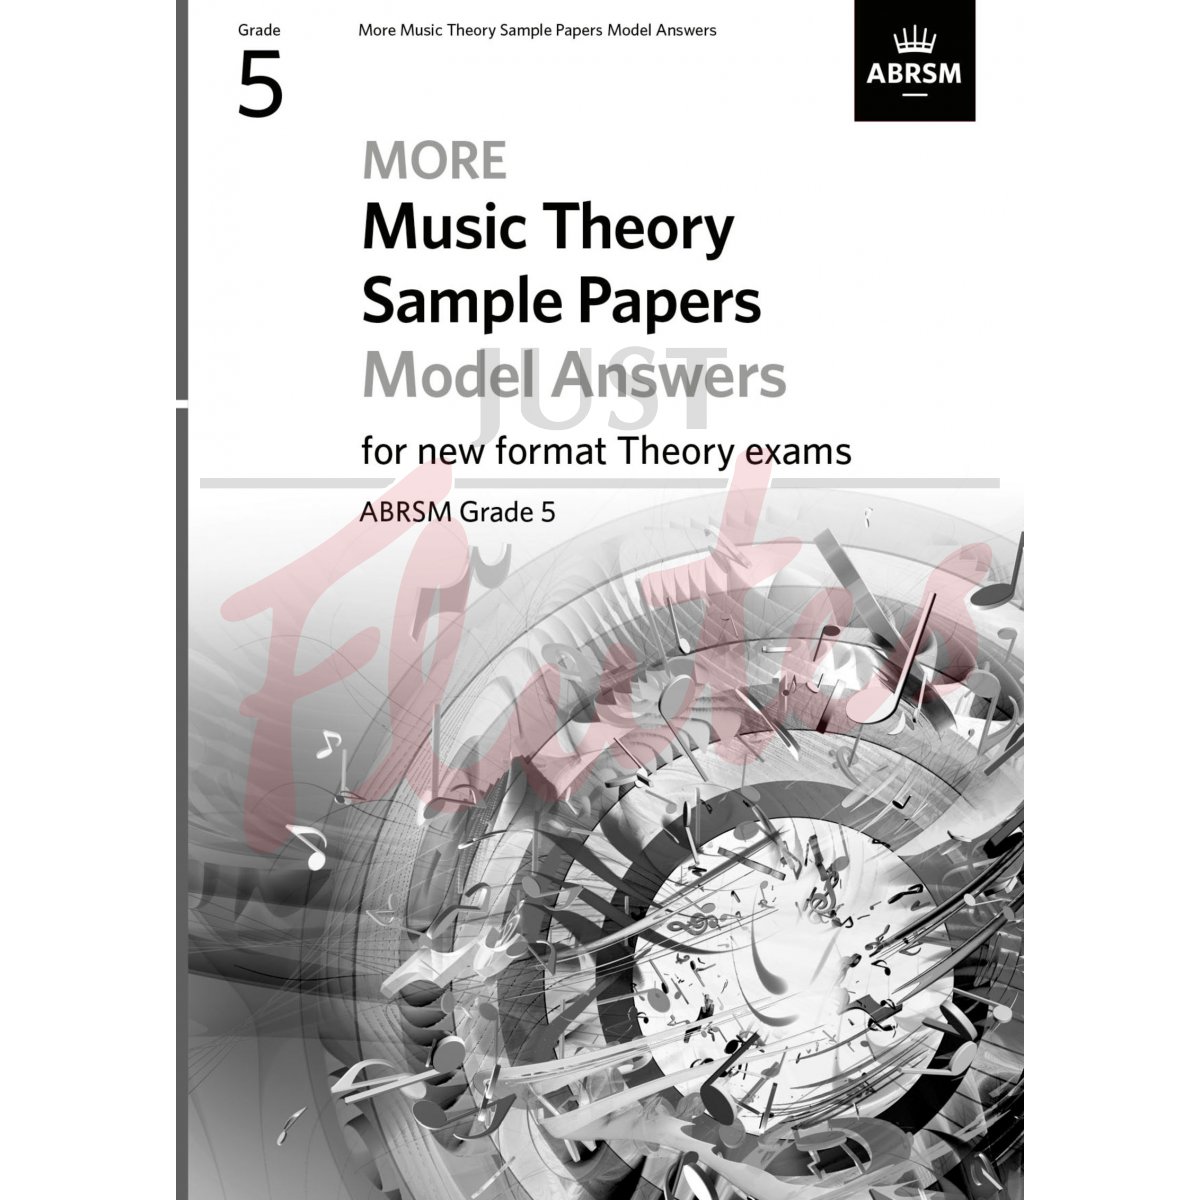 More Music Theory Sample Papers Grade 5 Model Answers